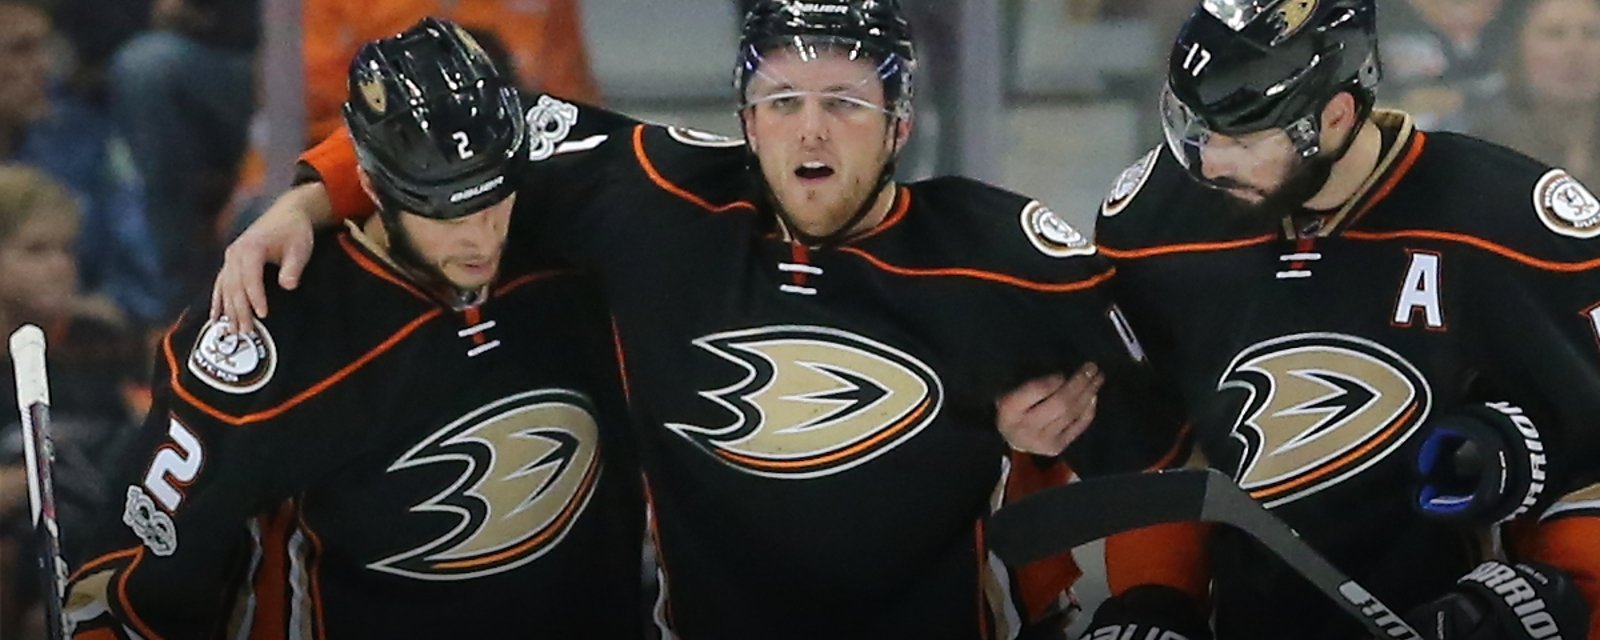 Breaking: Ducks star defenseman out with long-term injury